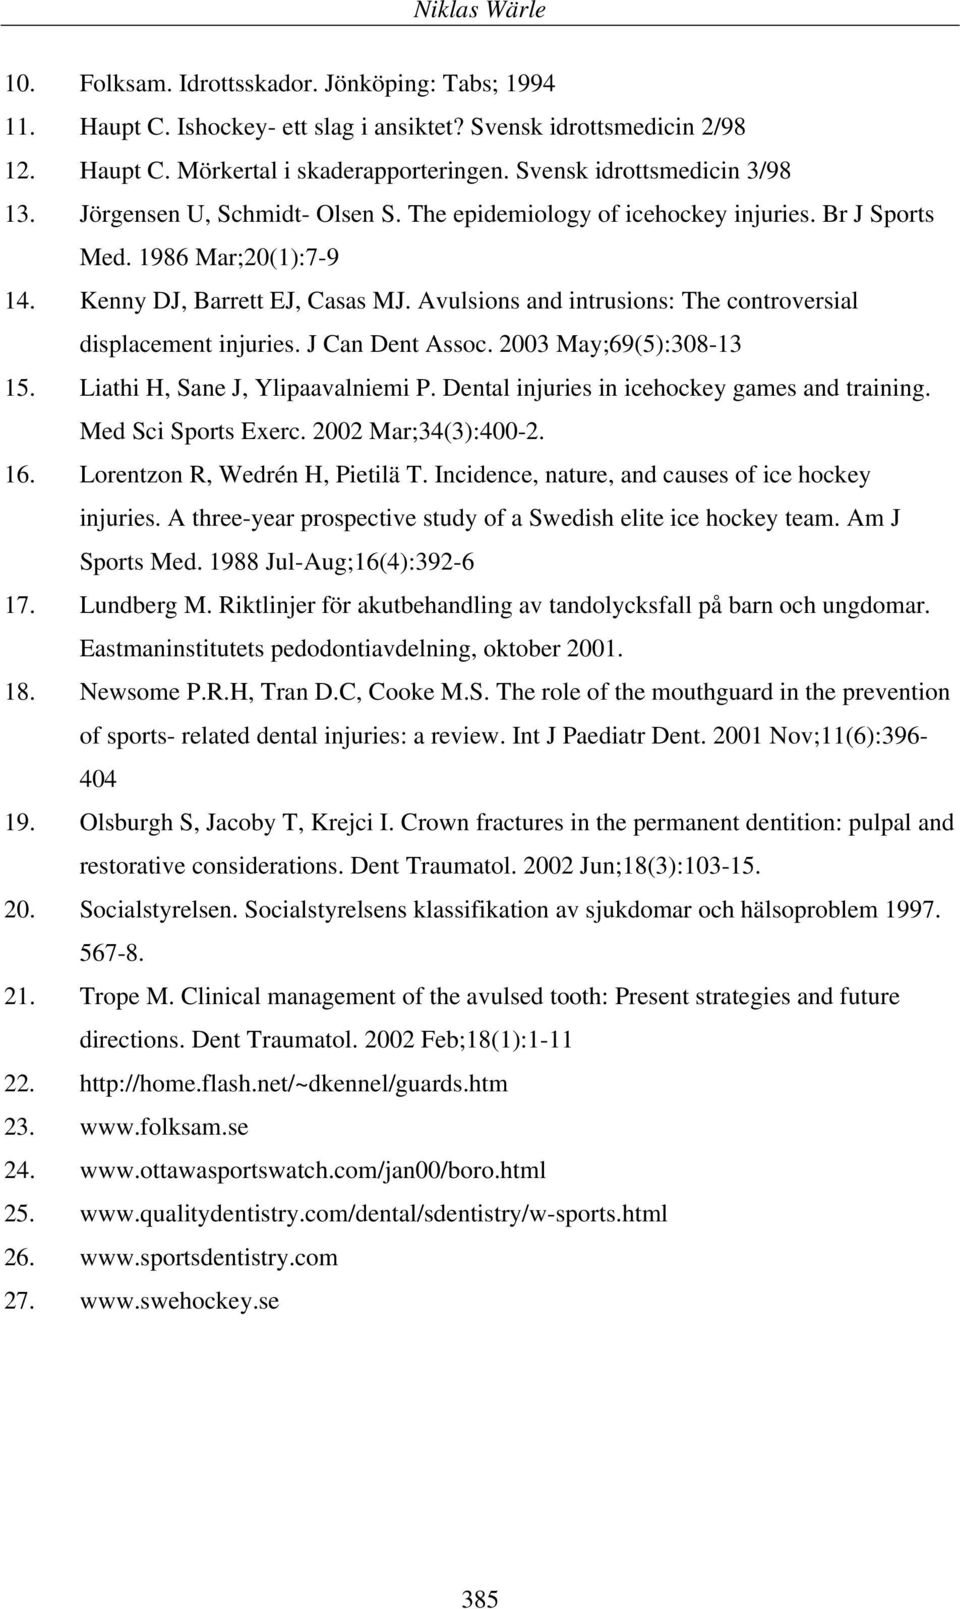 Avulsions and intrusions: The controversial displacement injuries. J Can Dent Assoc. 2003 May;69(5):308-13 15. Liathi H, Sane J, Ylipaavalniemi P. Dental injuries in icehockey games and training.